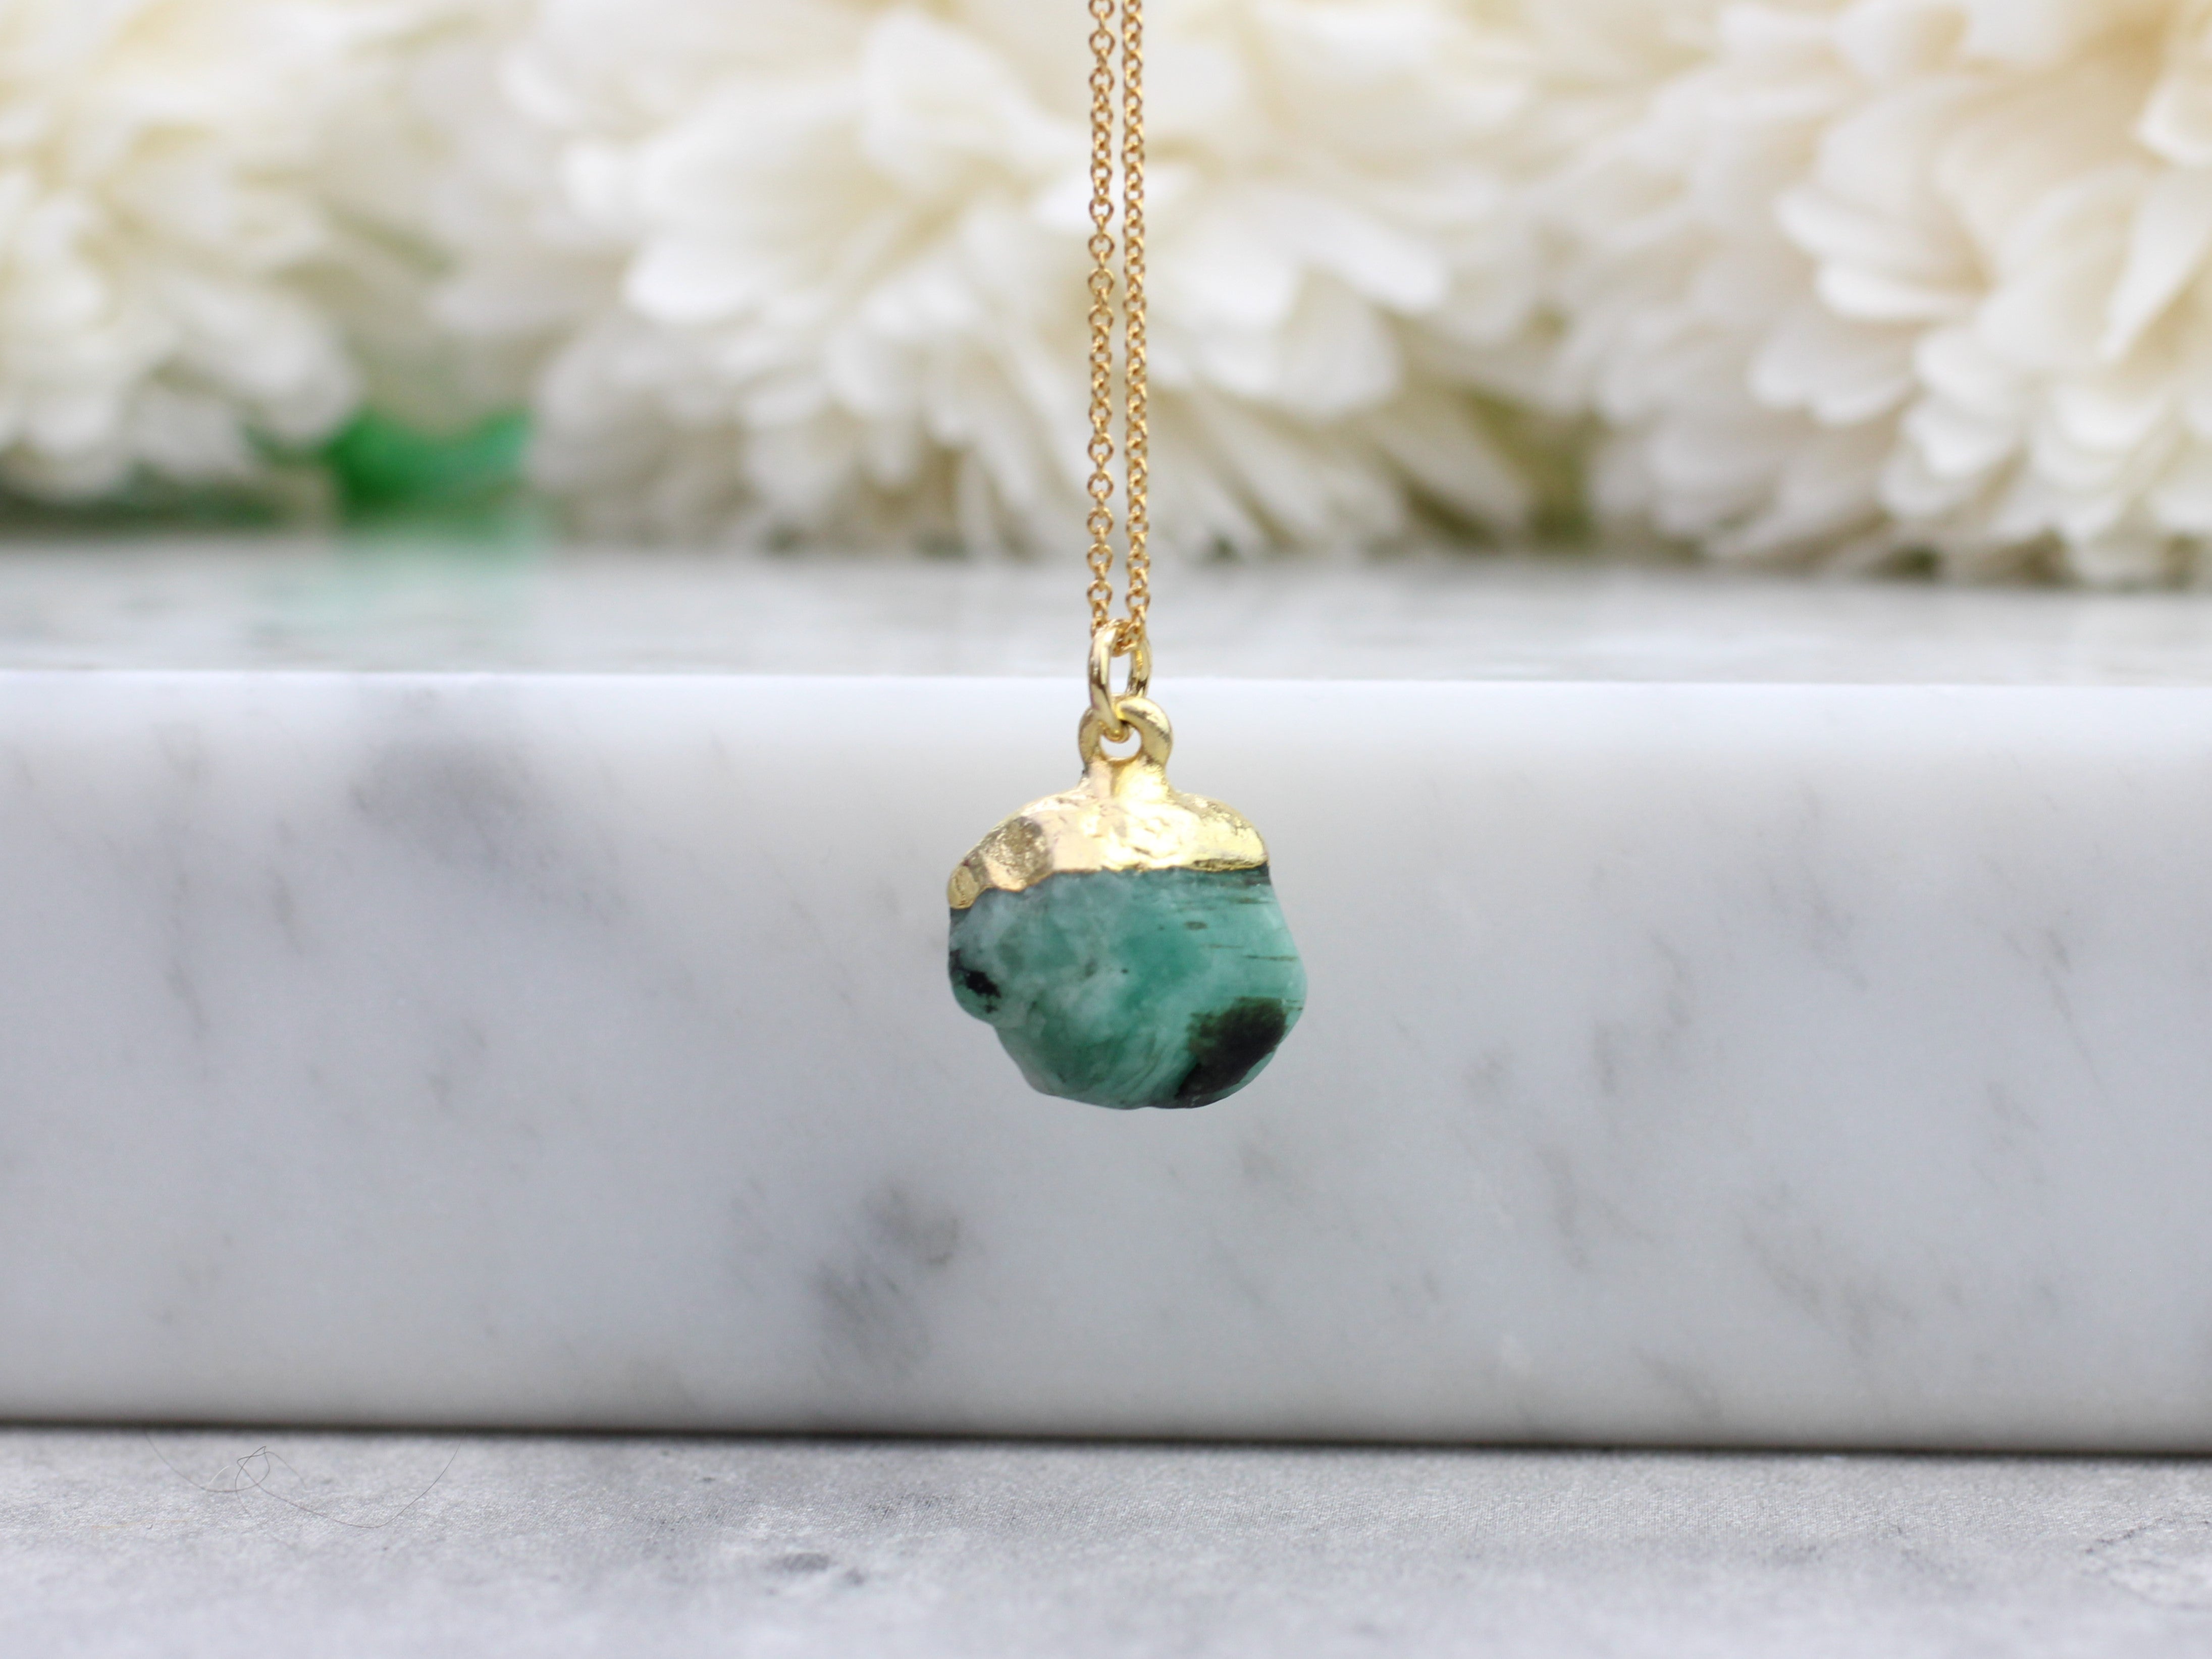 Custom Raw Gemstone Necklace, Birthstone Necklace, Personalized Necklace,  Healing Crystal Gift, Rough Natural Gemstone Pendant, Gift for Her - Etsy